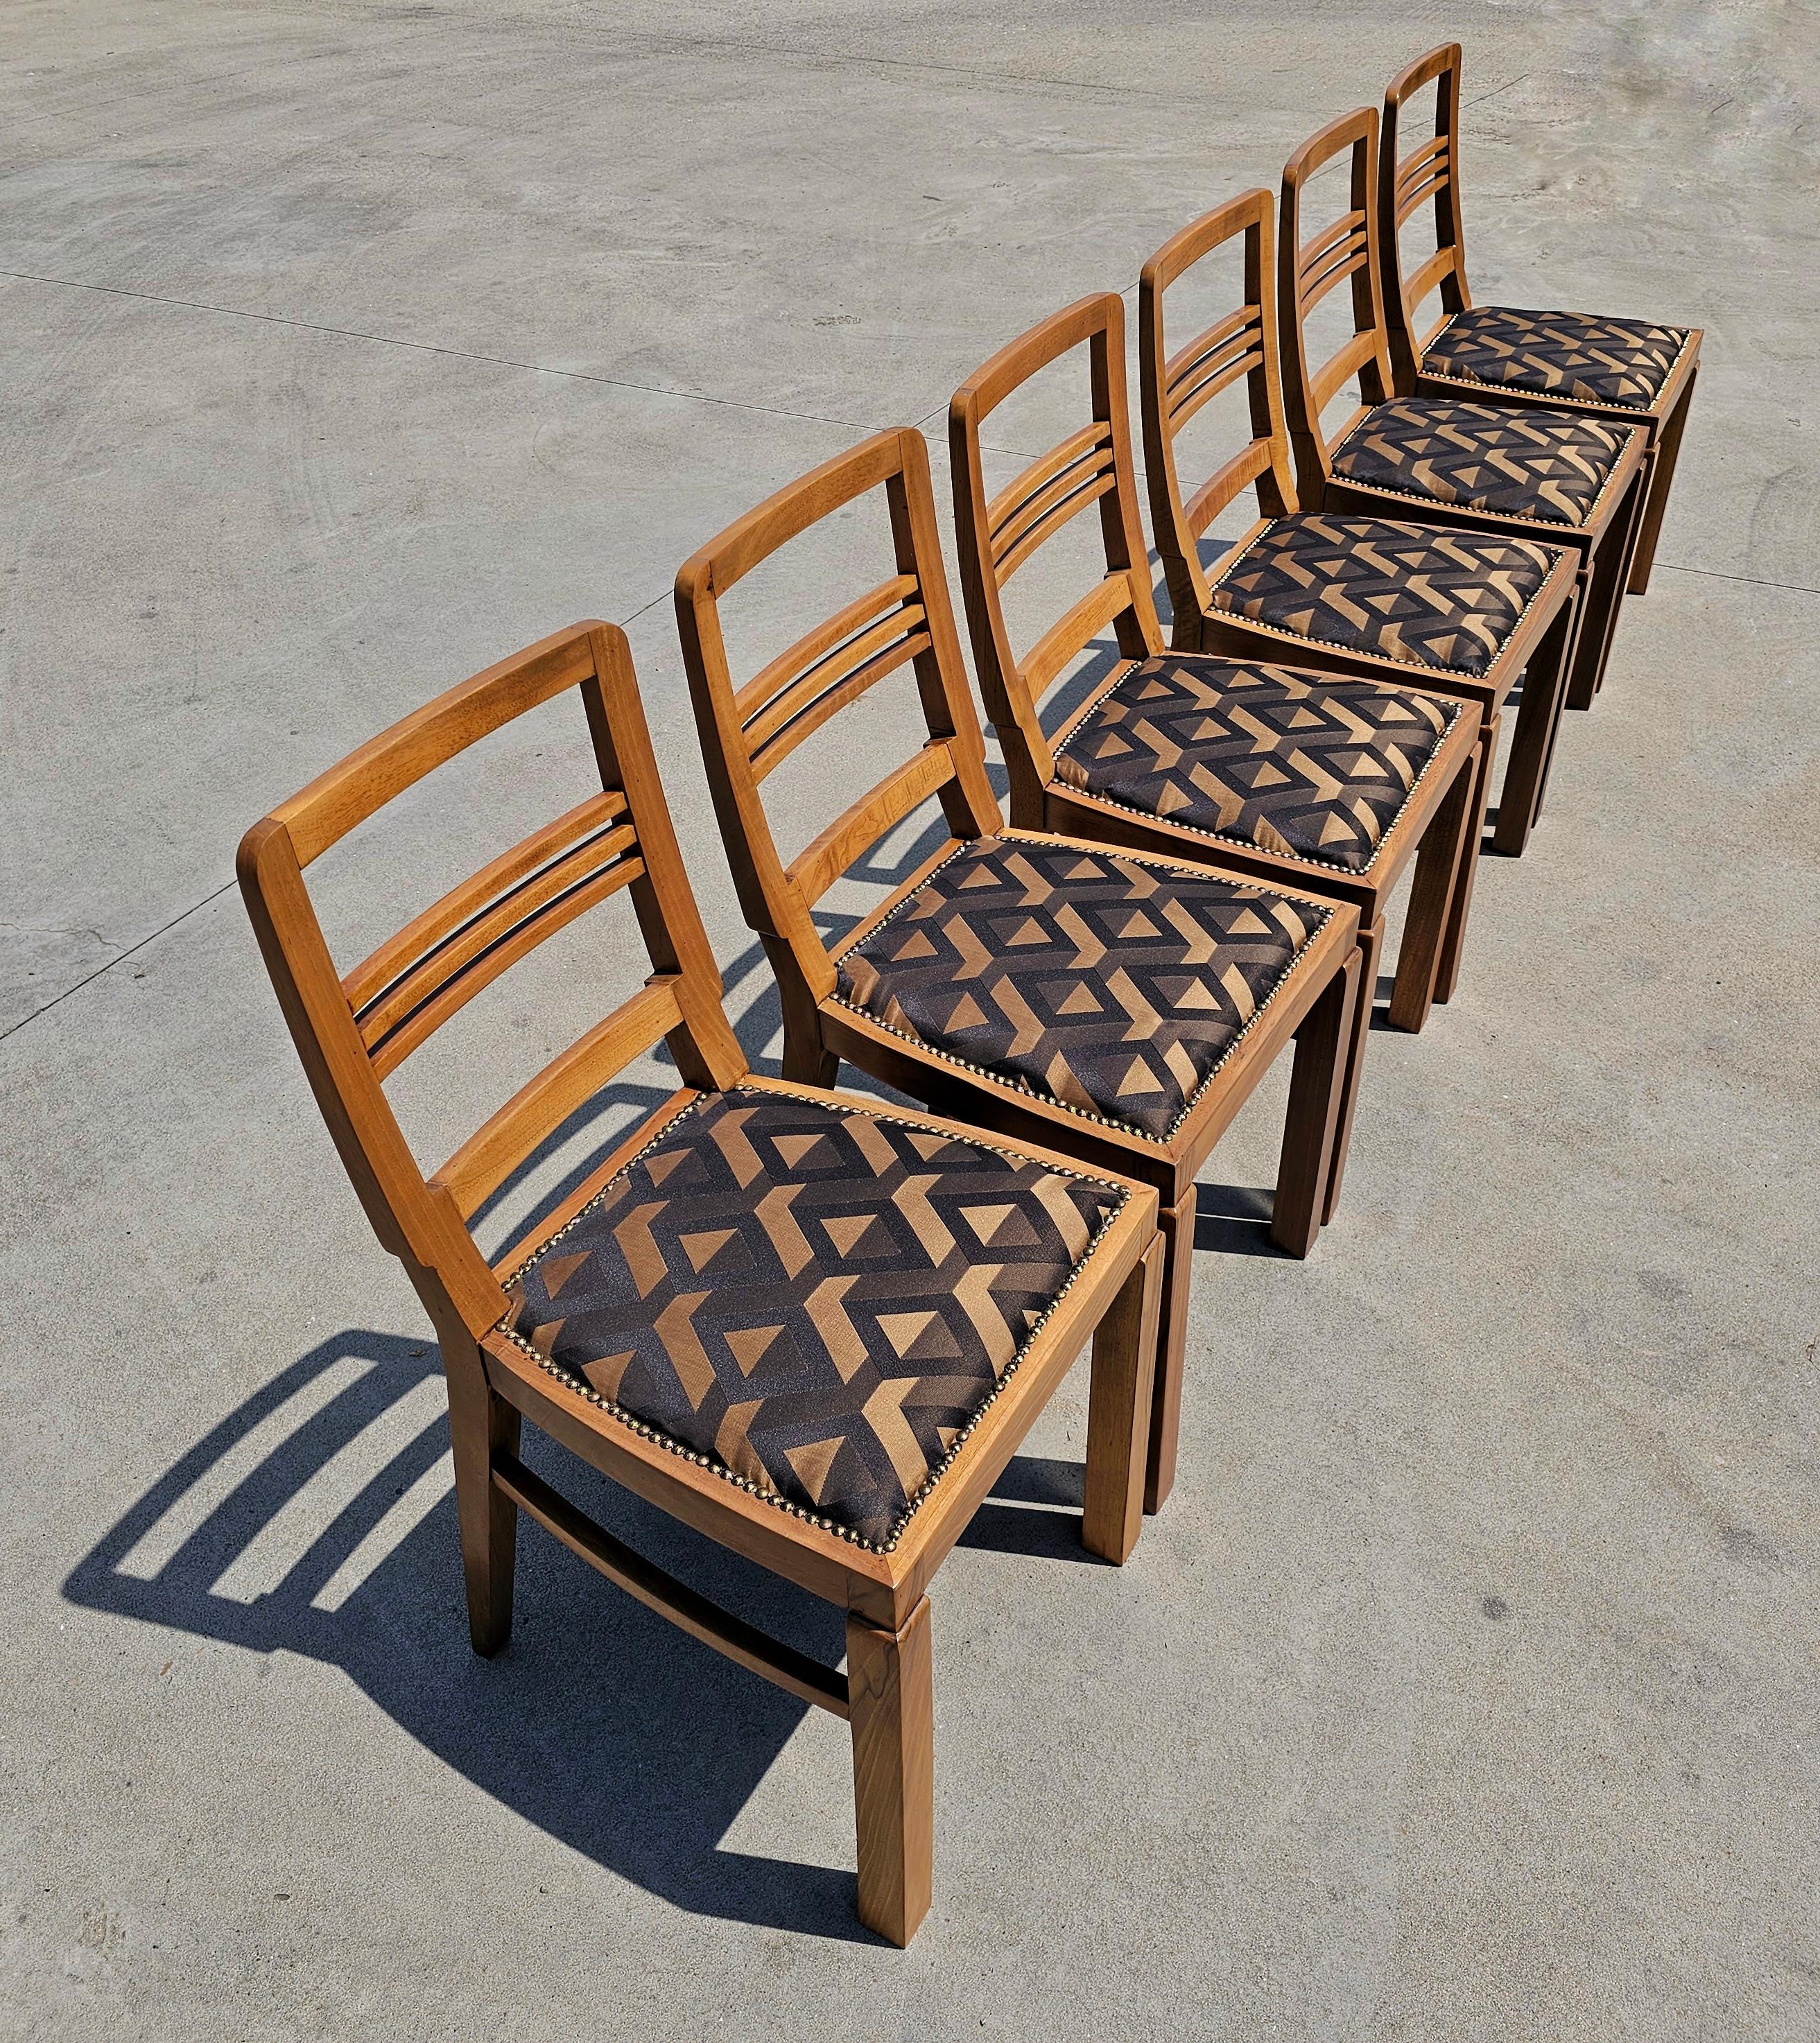 In this listing you will find a set of 6 beautiful Art Deco Dining chairs made in style of Koloman Moser. Walnut roots veneer in the front of the frames and the backrest give these chairs a note of luxury. Solid walnut frame and legs. Recently